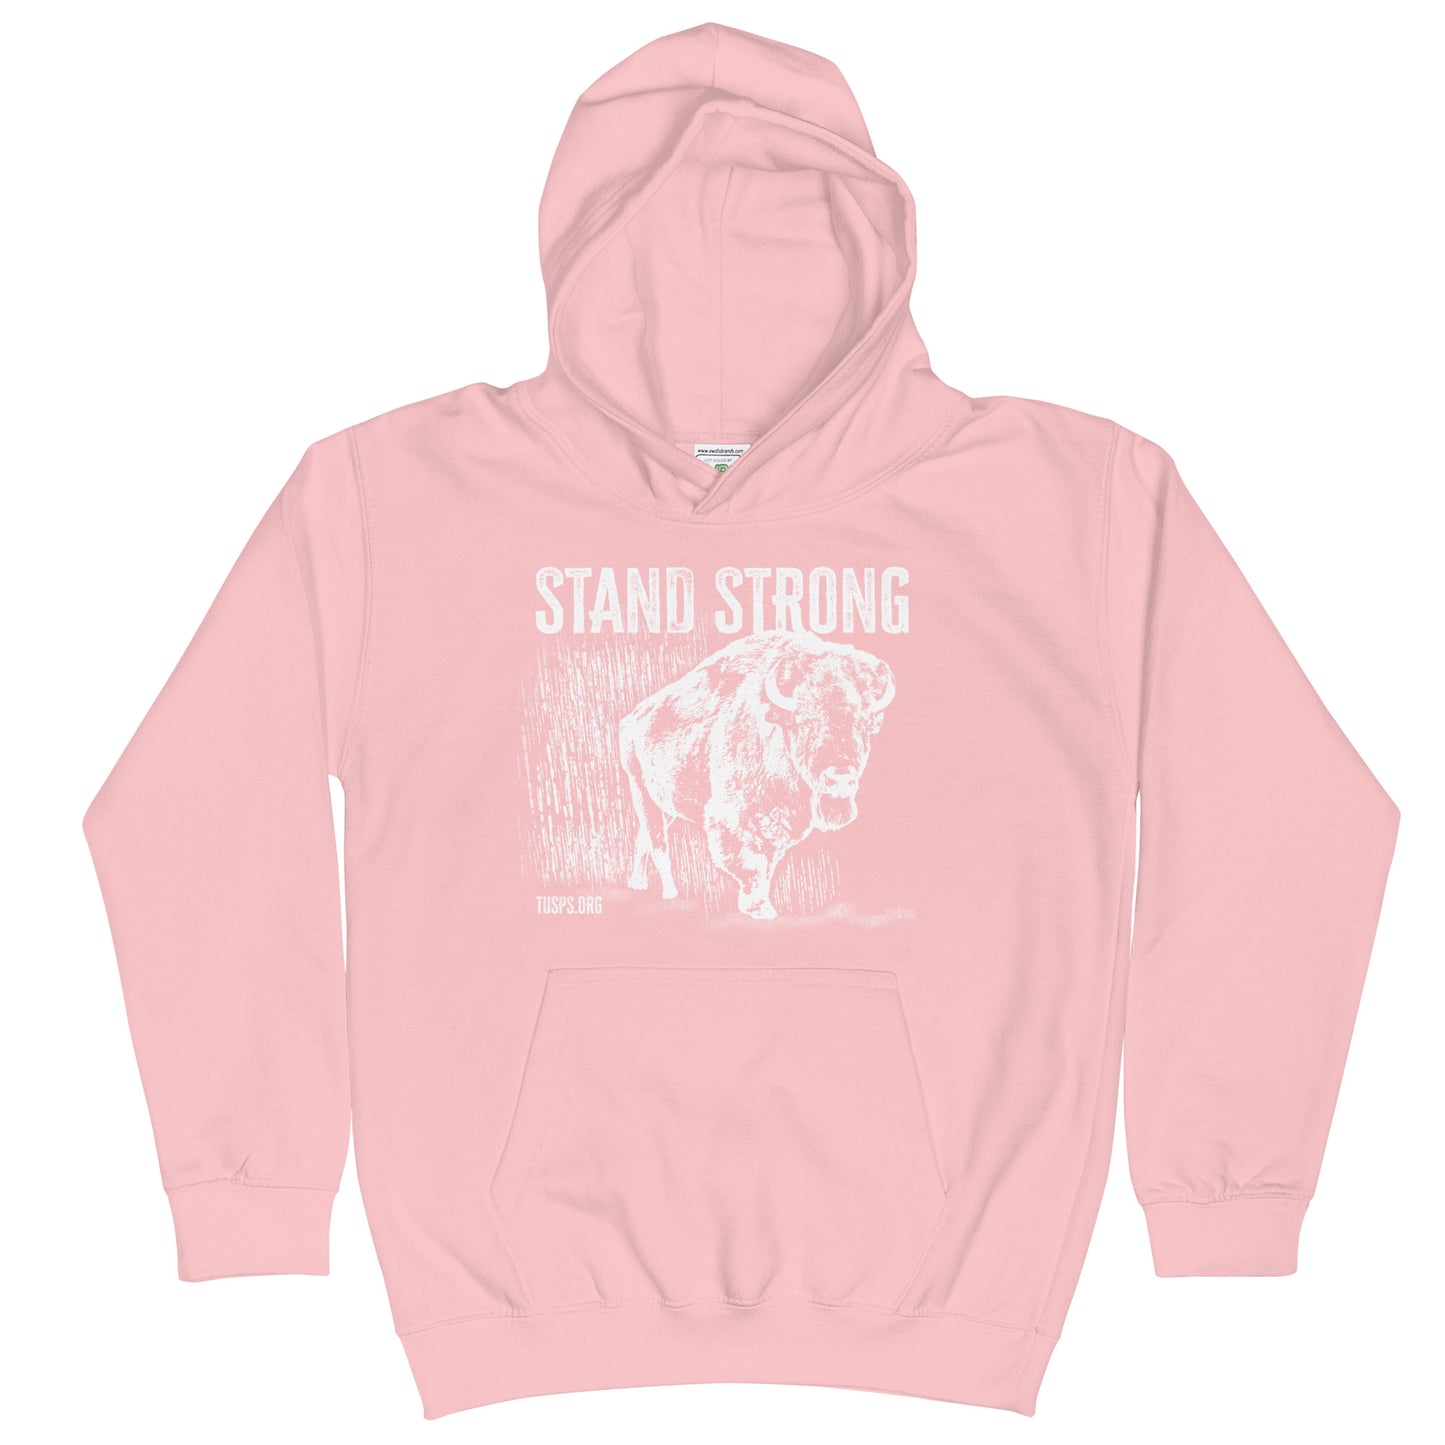 YOUTH - STAND STRONG HOODIE